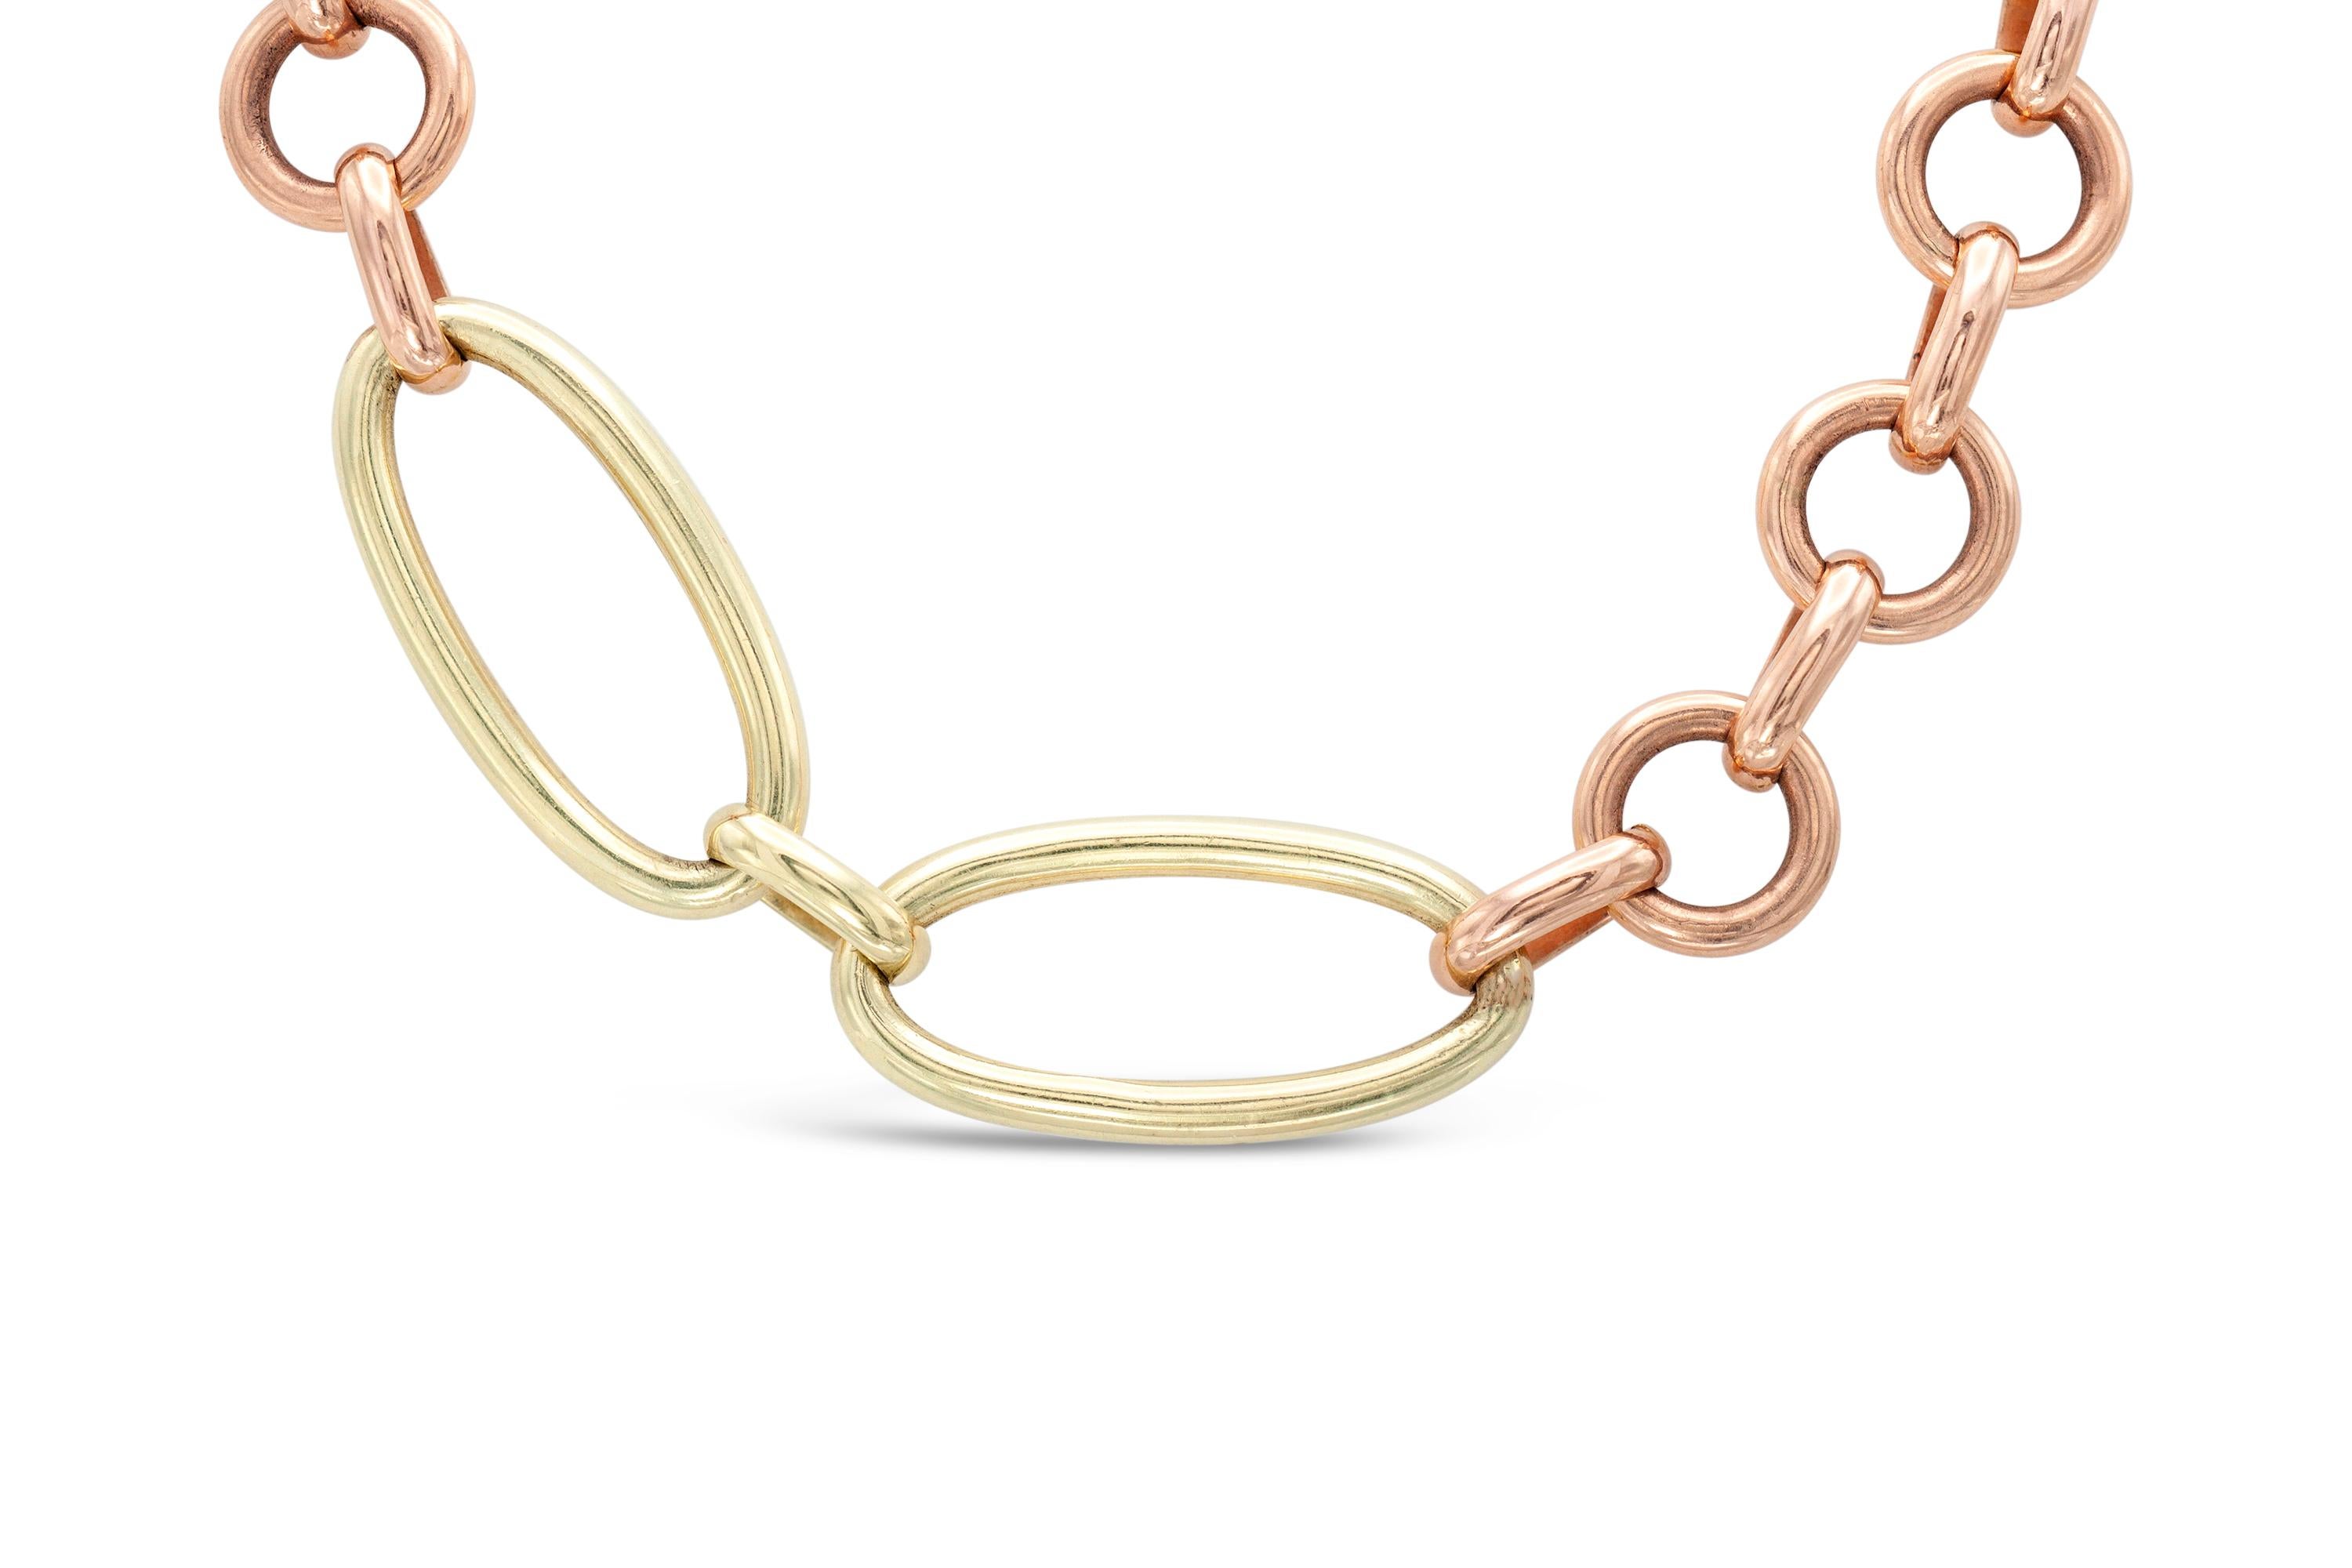 Finely crafted in 14k yellow and rose gold.
38 inches
165.9 grams